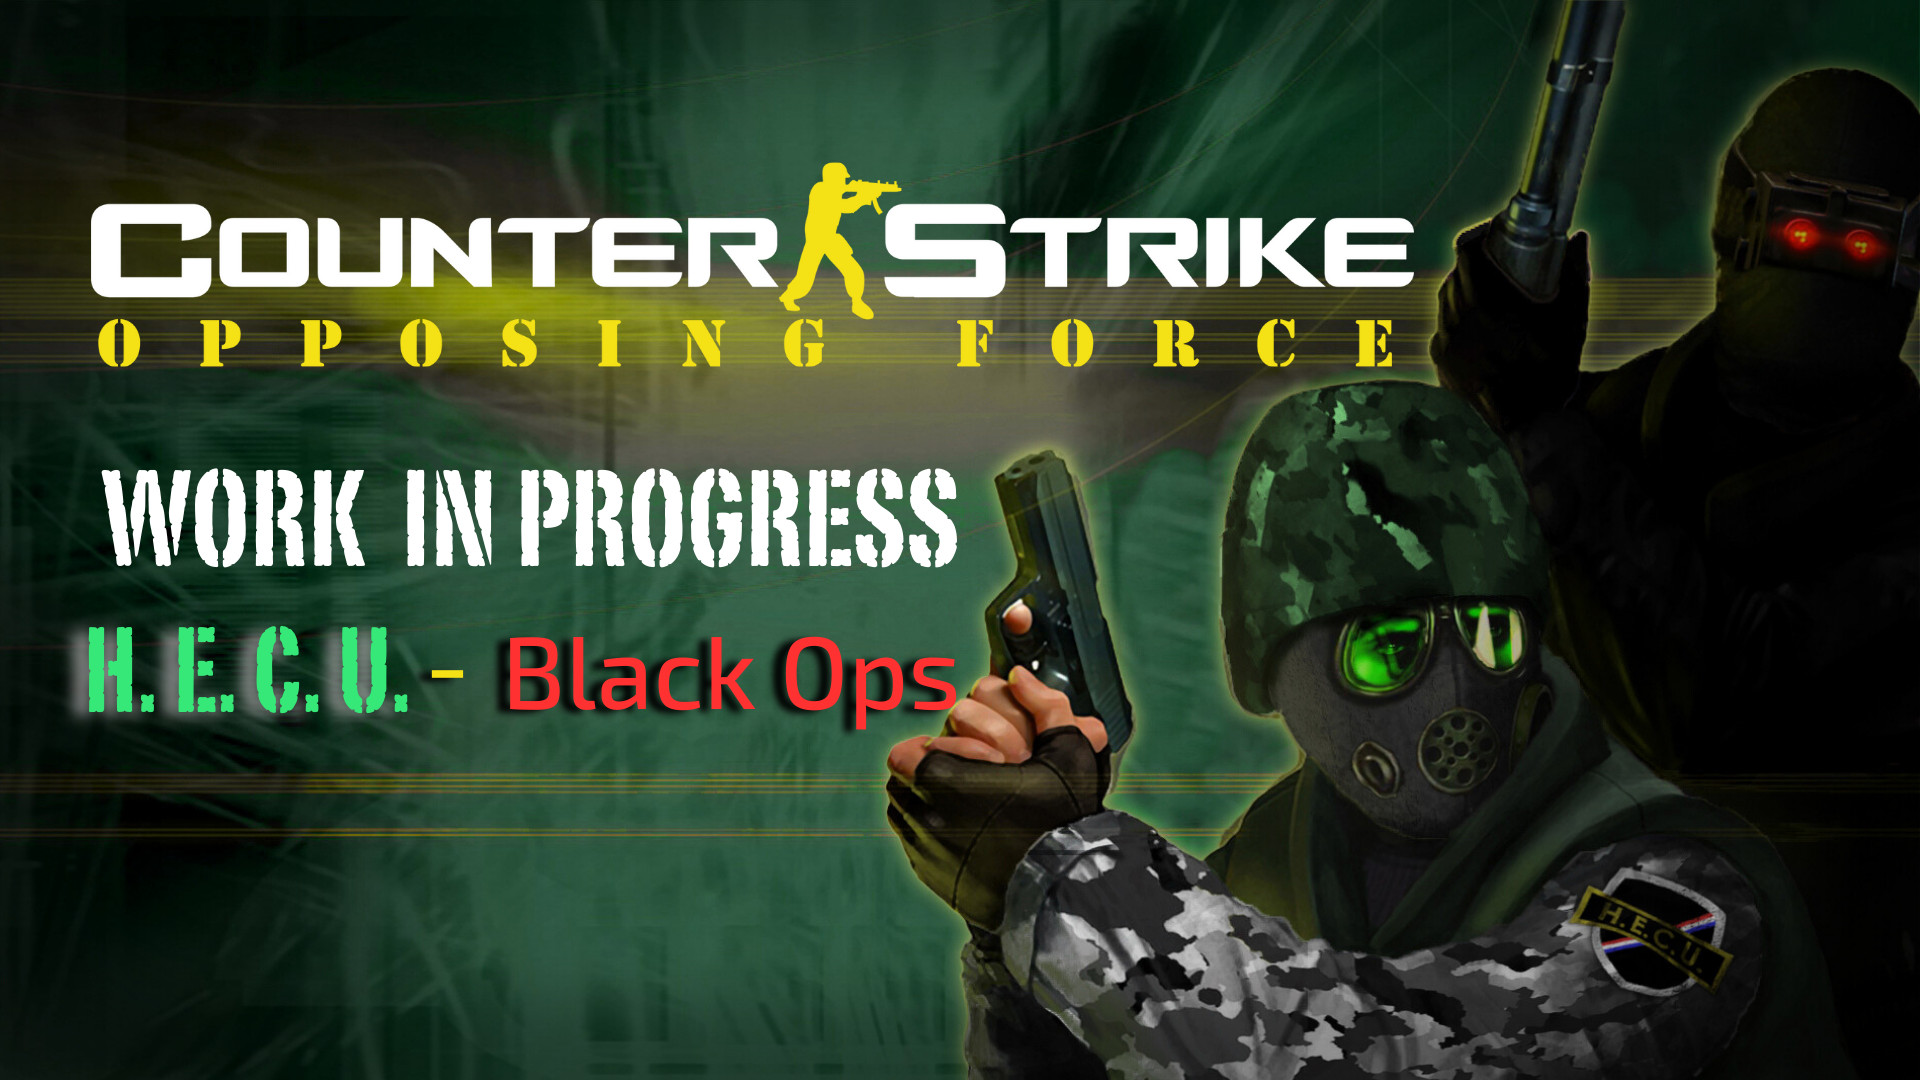 Critical Strike Portable 🔥 Play online